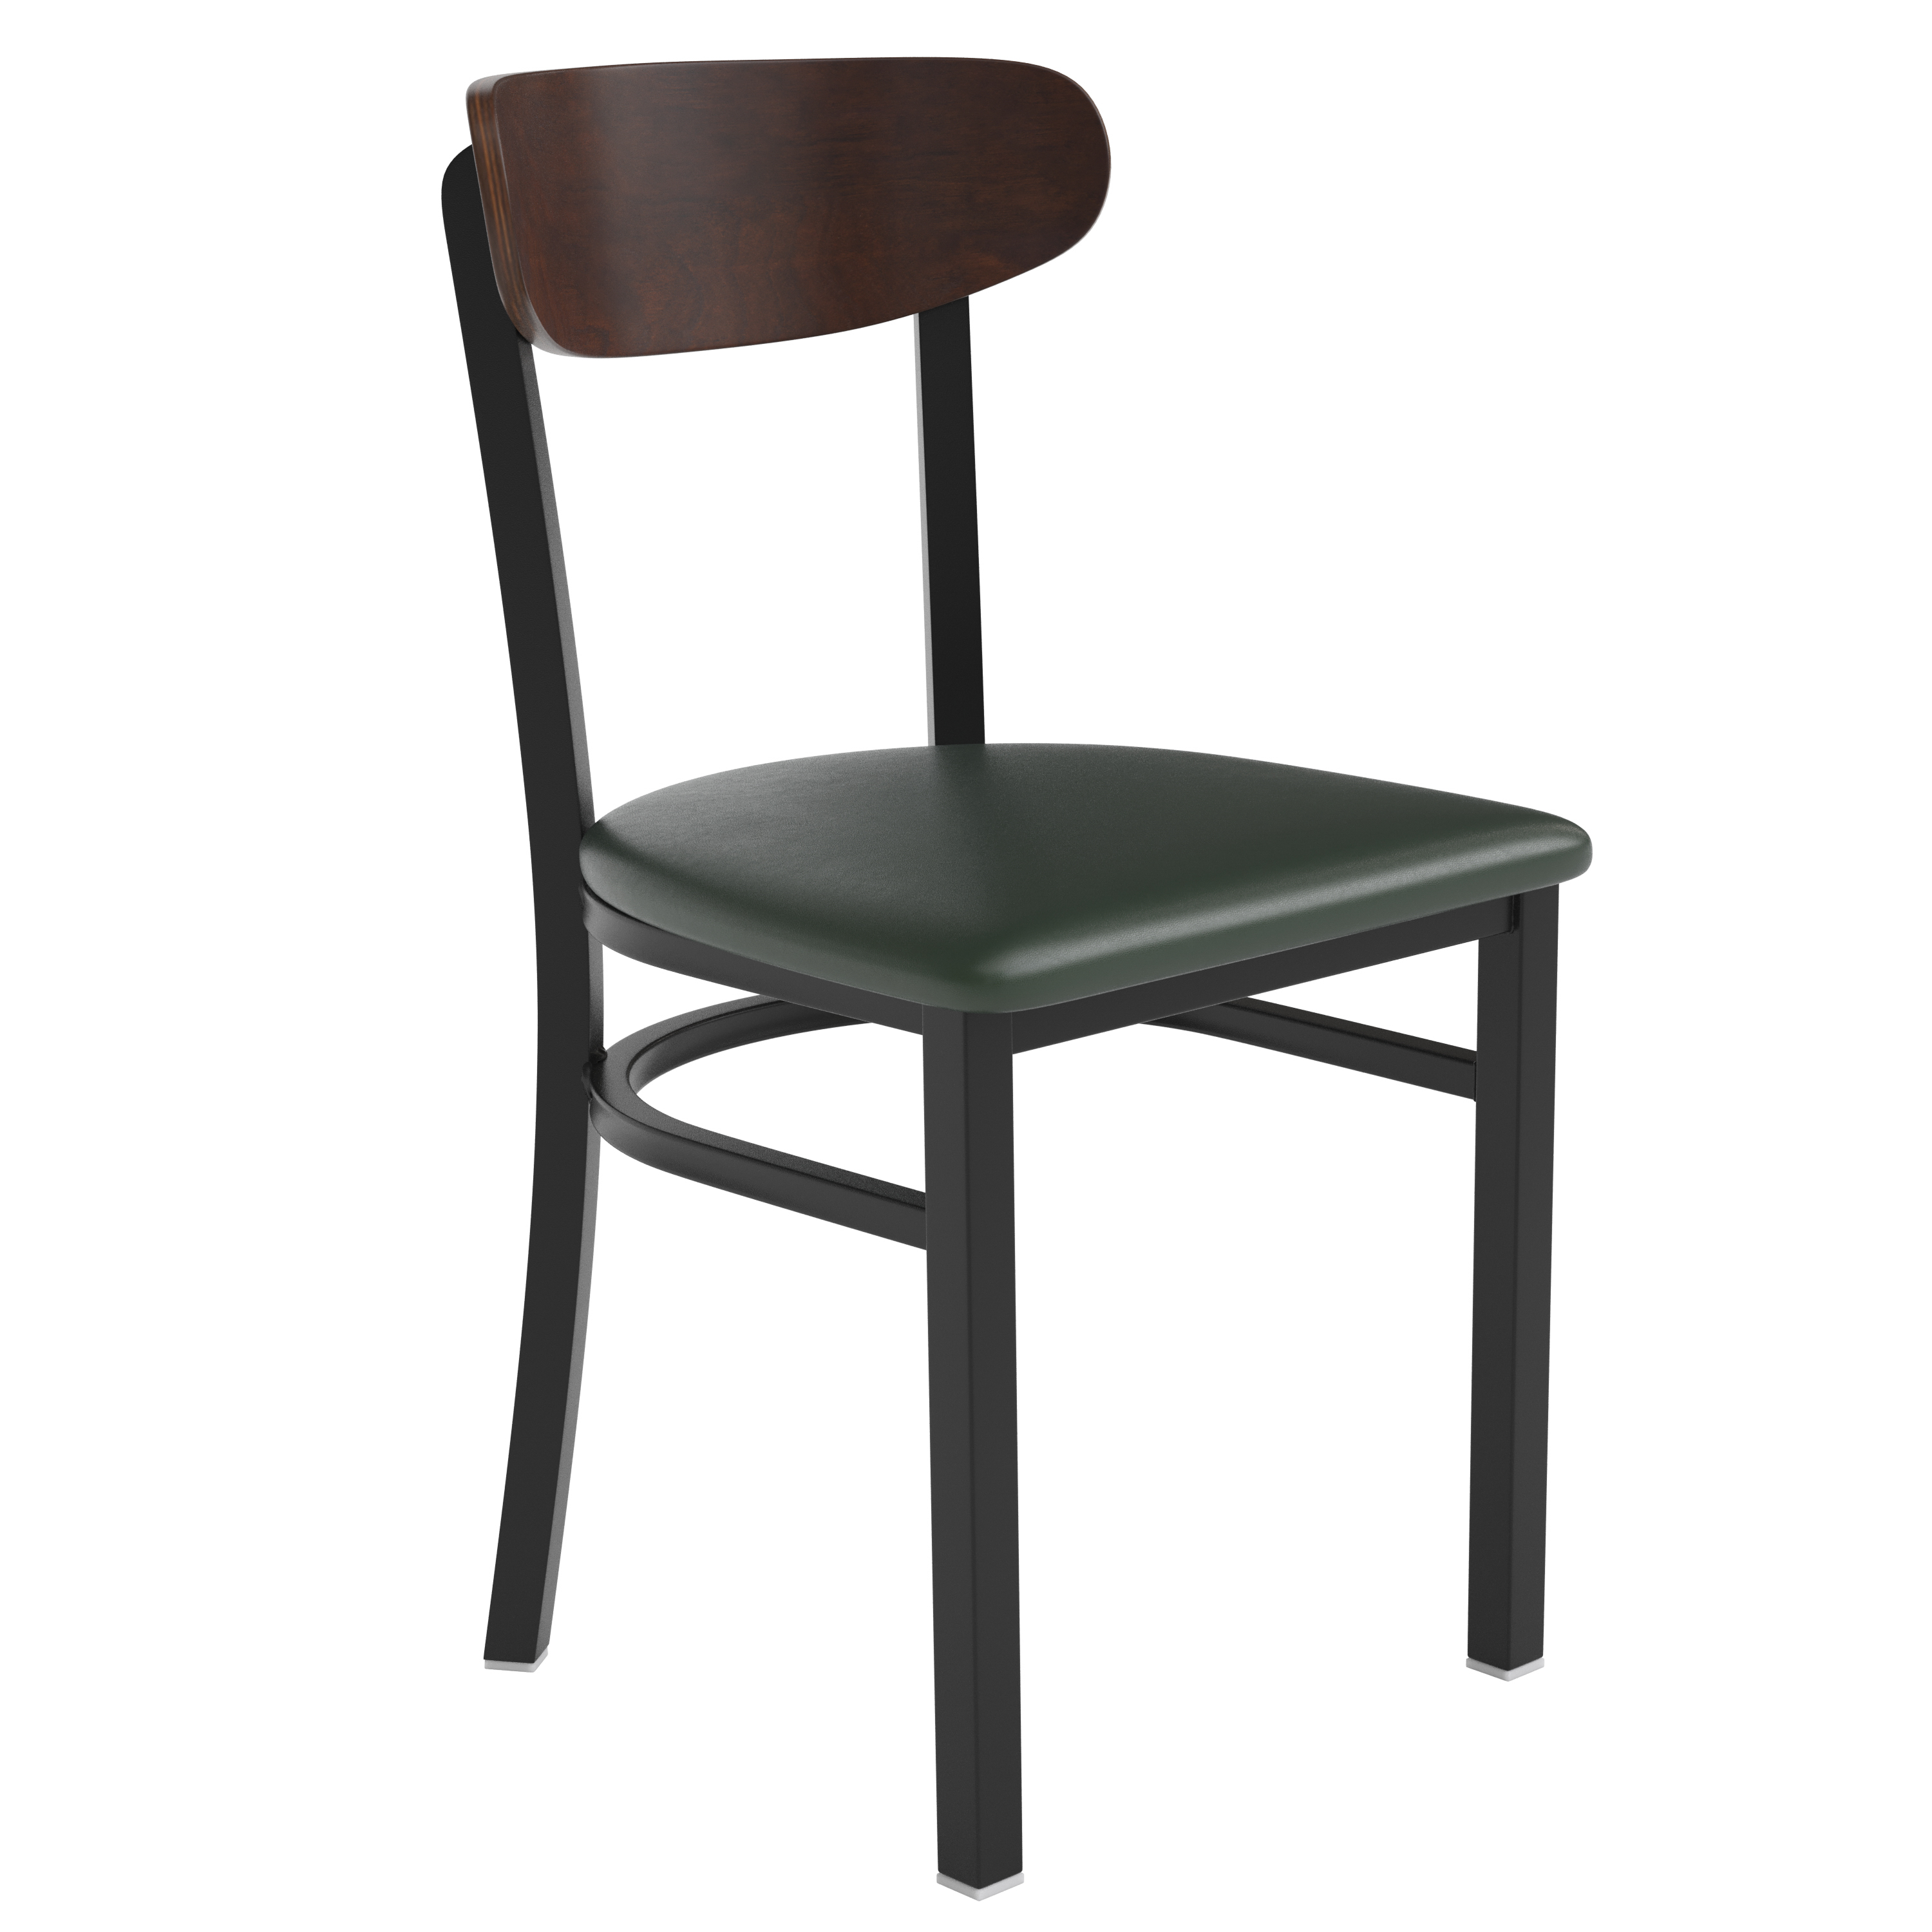 Flash Furniture XU-DG6V5GNV-WAL-GG Commercial Dining Chair with Walnut Wood Boomerang Back - Green Vinyl Seat, Black Steel Frame